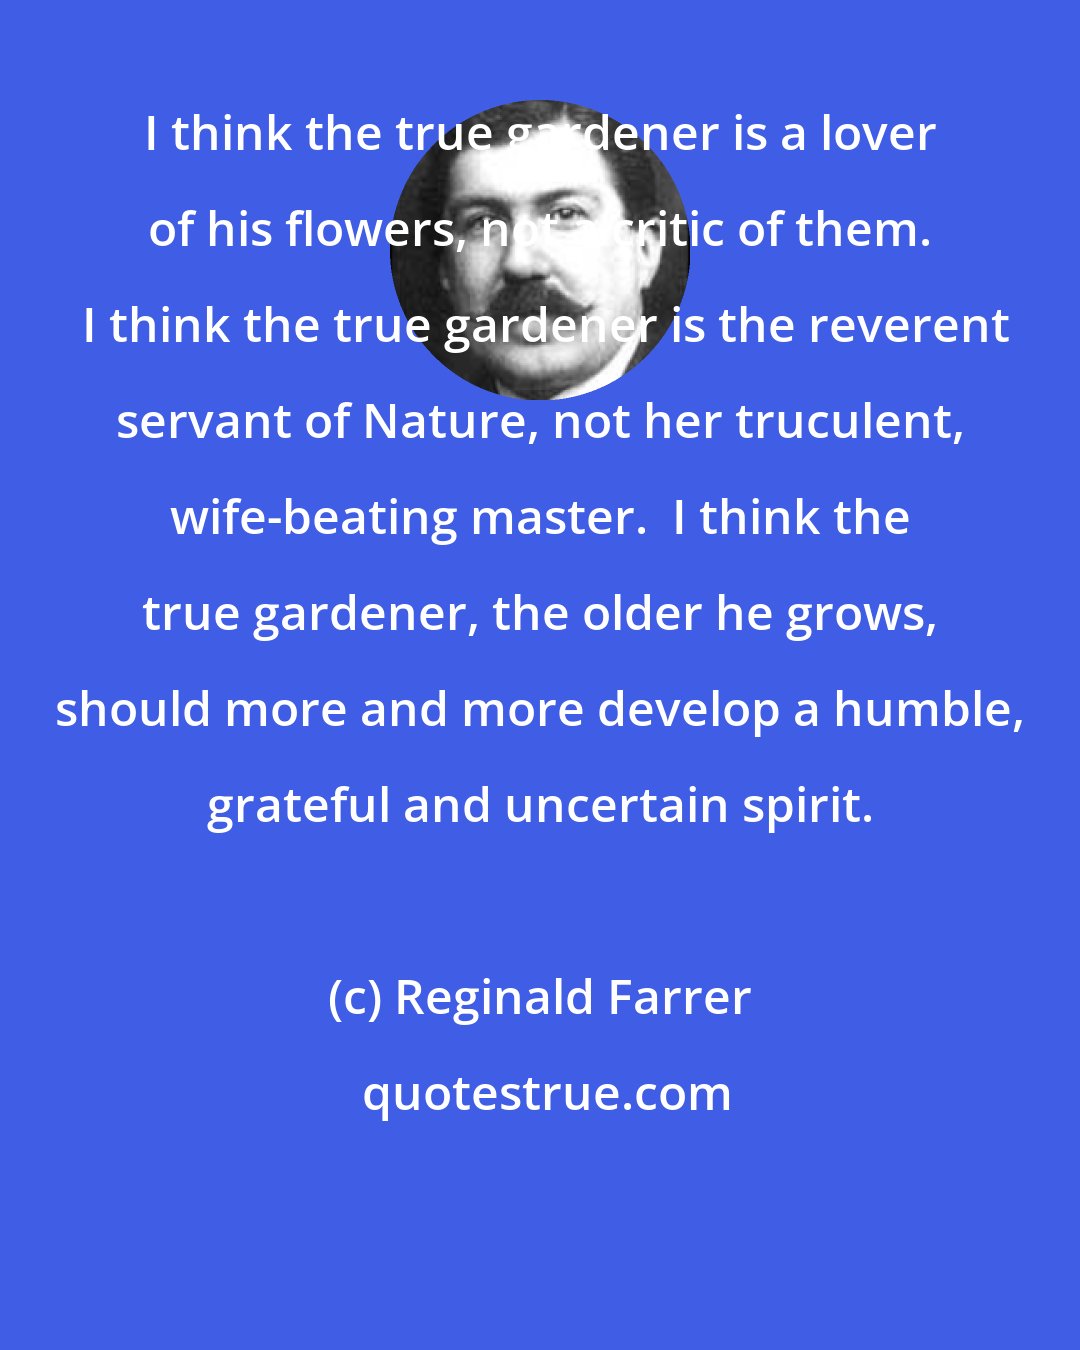 Reginald Farrer: I think the true gardener is a lover of his flowers, not a critic of them.  I think the true gardener is the reverent servant of Nature, not her truculent, wife-beating master.  I think the true gardener, the older he grows, should more and more develop a humble, grateful and uncertain spirit.